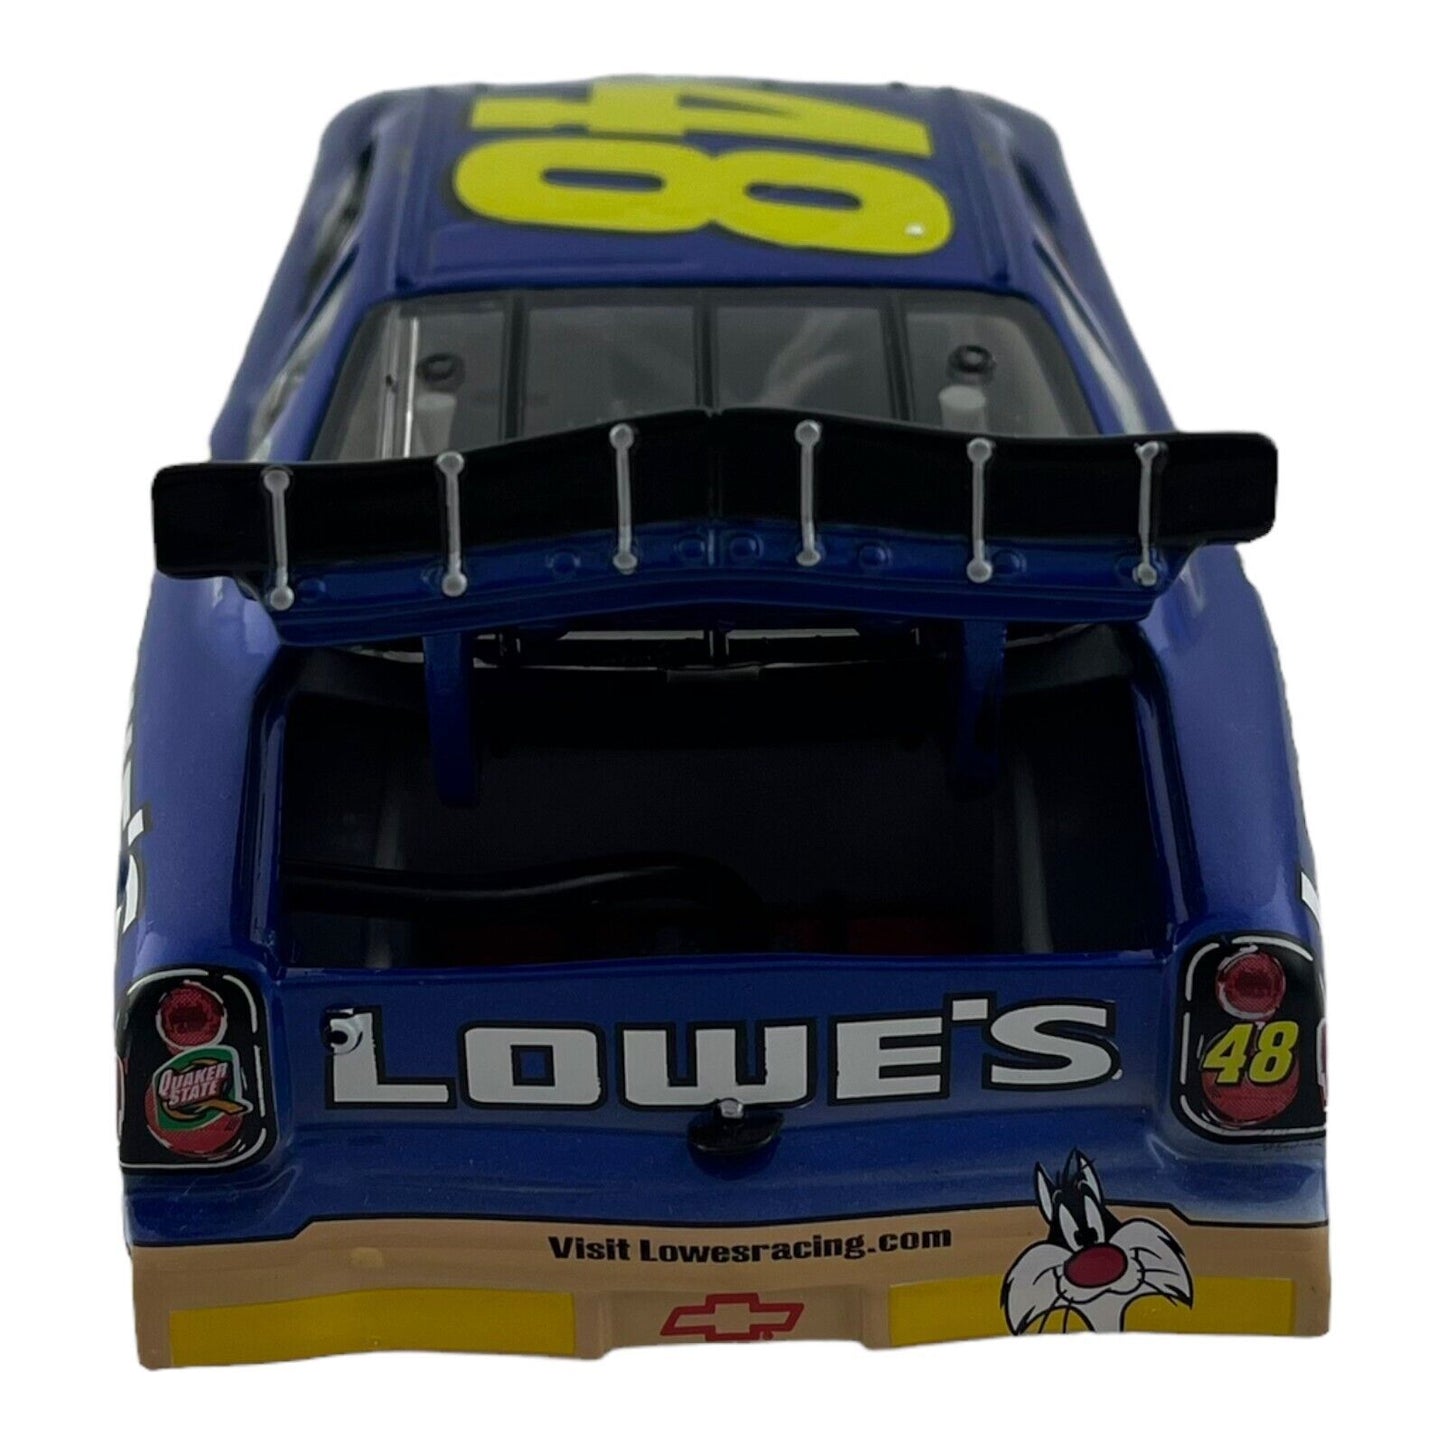 1:24 Scale Jimmie Johnson Lowe's Looney Tunes Rematch Diecast Vehicle 2002